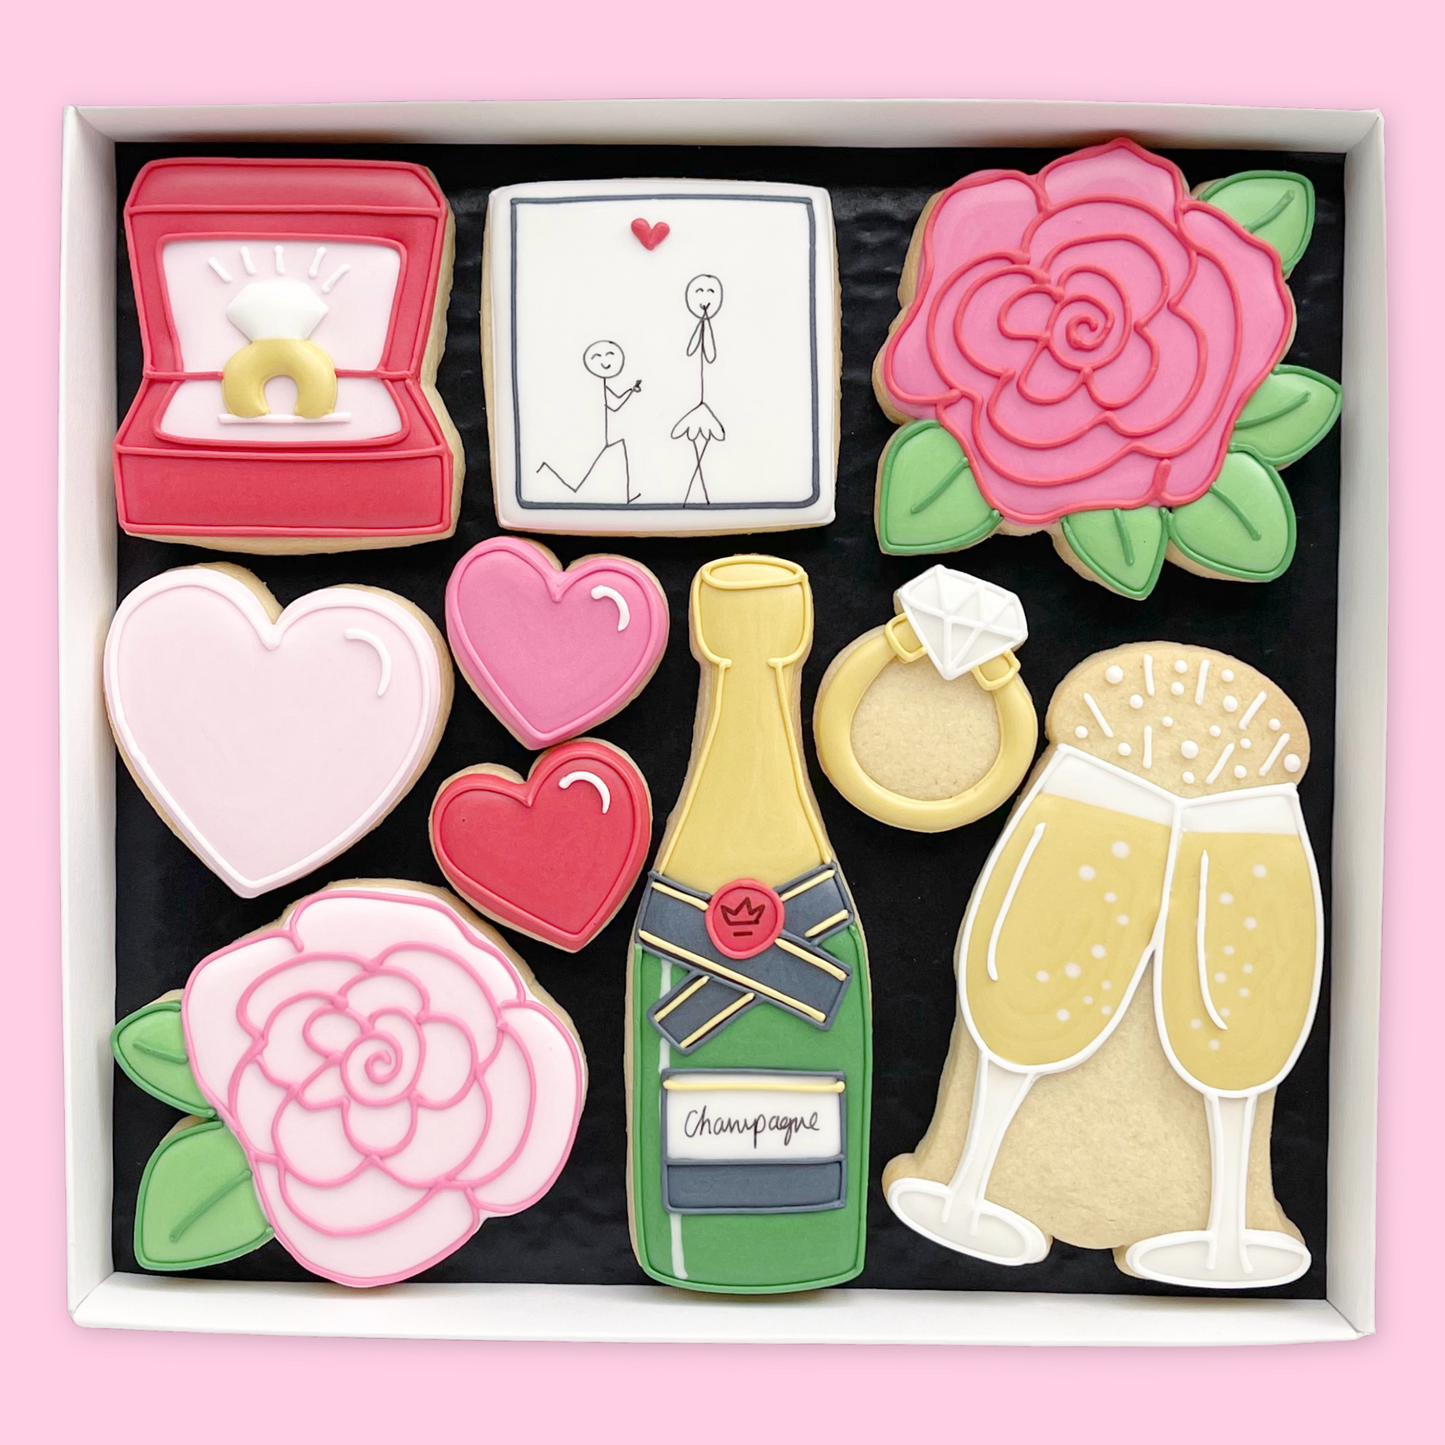 Hand Iced Engagement themed biscuits in an open white gift box by Katie's Biscuit Shop